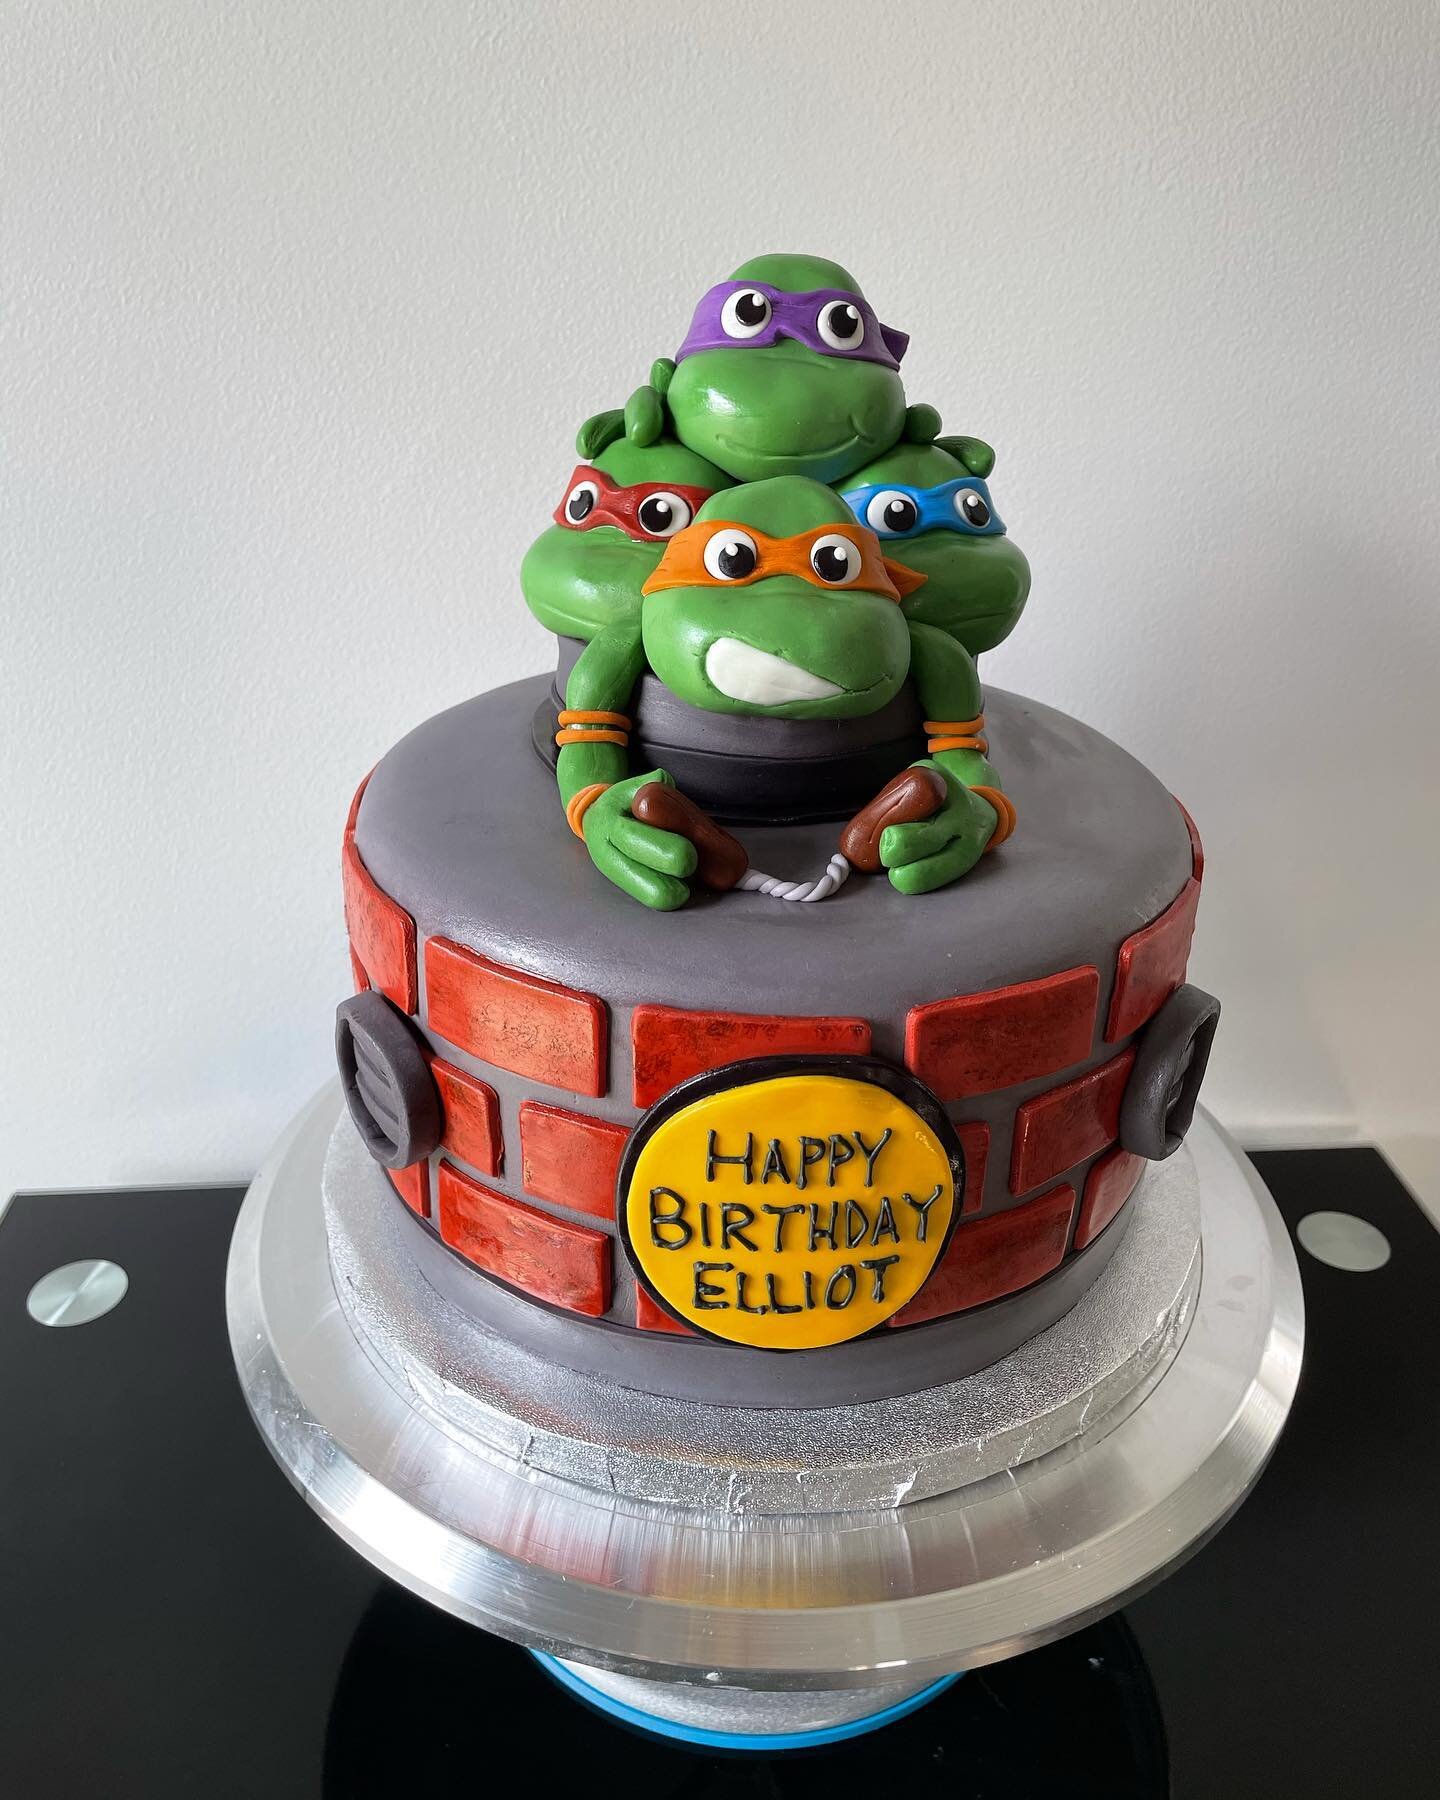 #michealangelo was the birthday boys favorite and front and center in our #ninjaturtles cakey today! Theme continued, with green velvet cake and an orange cream cheese buttercream filling. All deco is 100% hand made, sculpted and edible using marshma